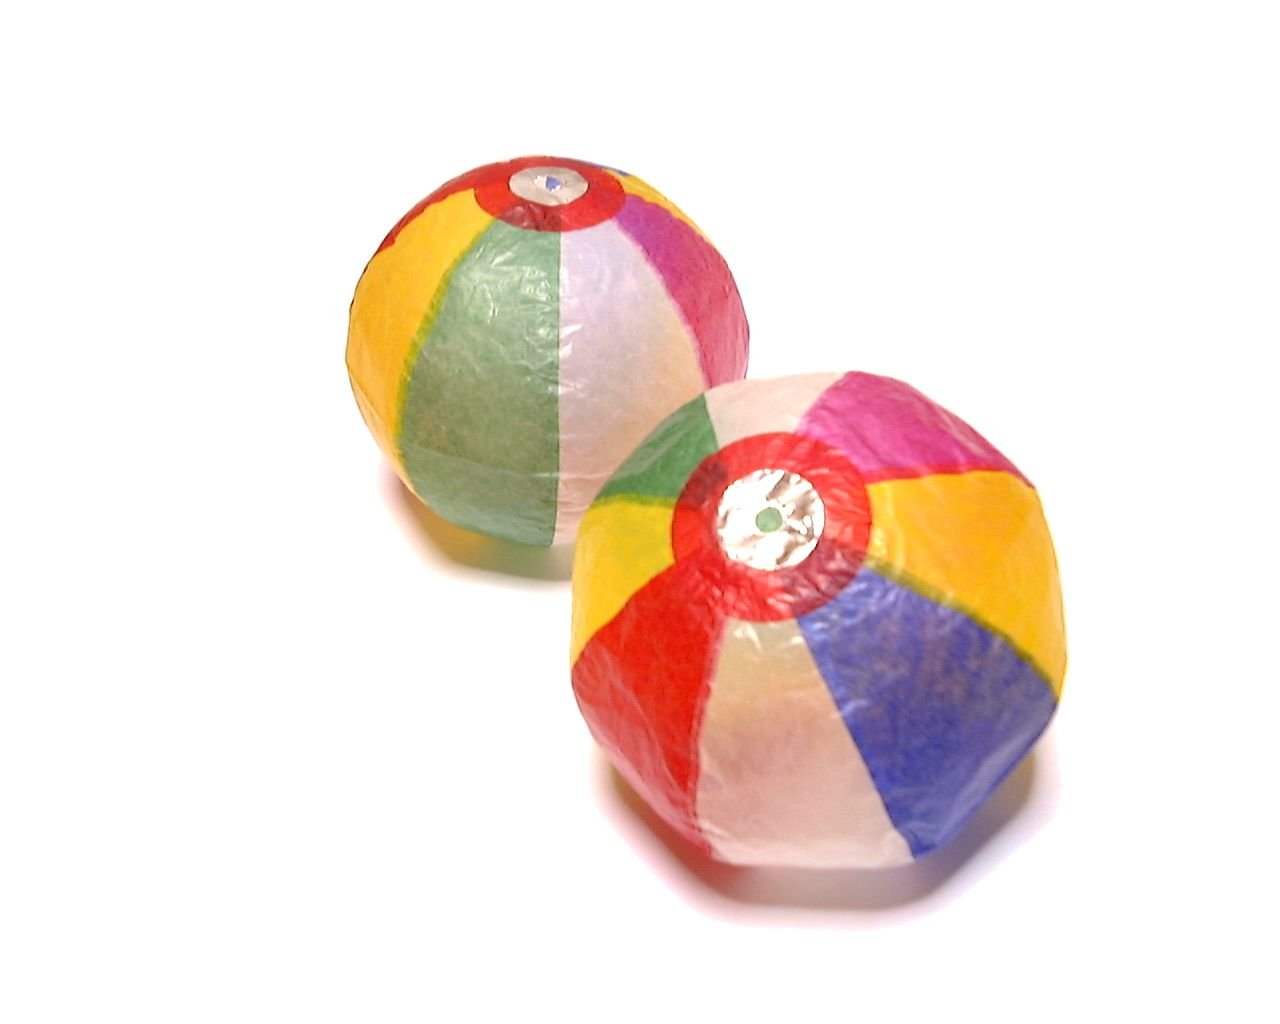 two plastic balls with red, yellow, blue, green and pink designs